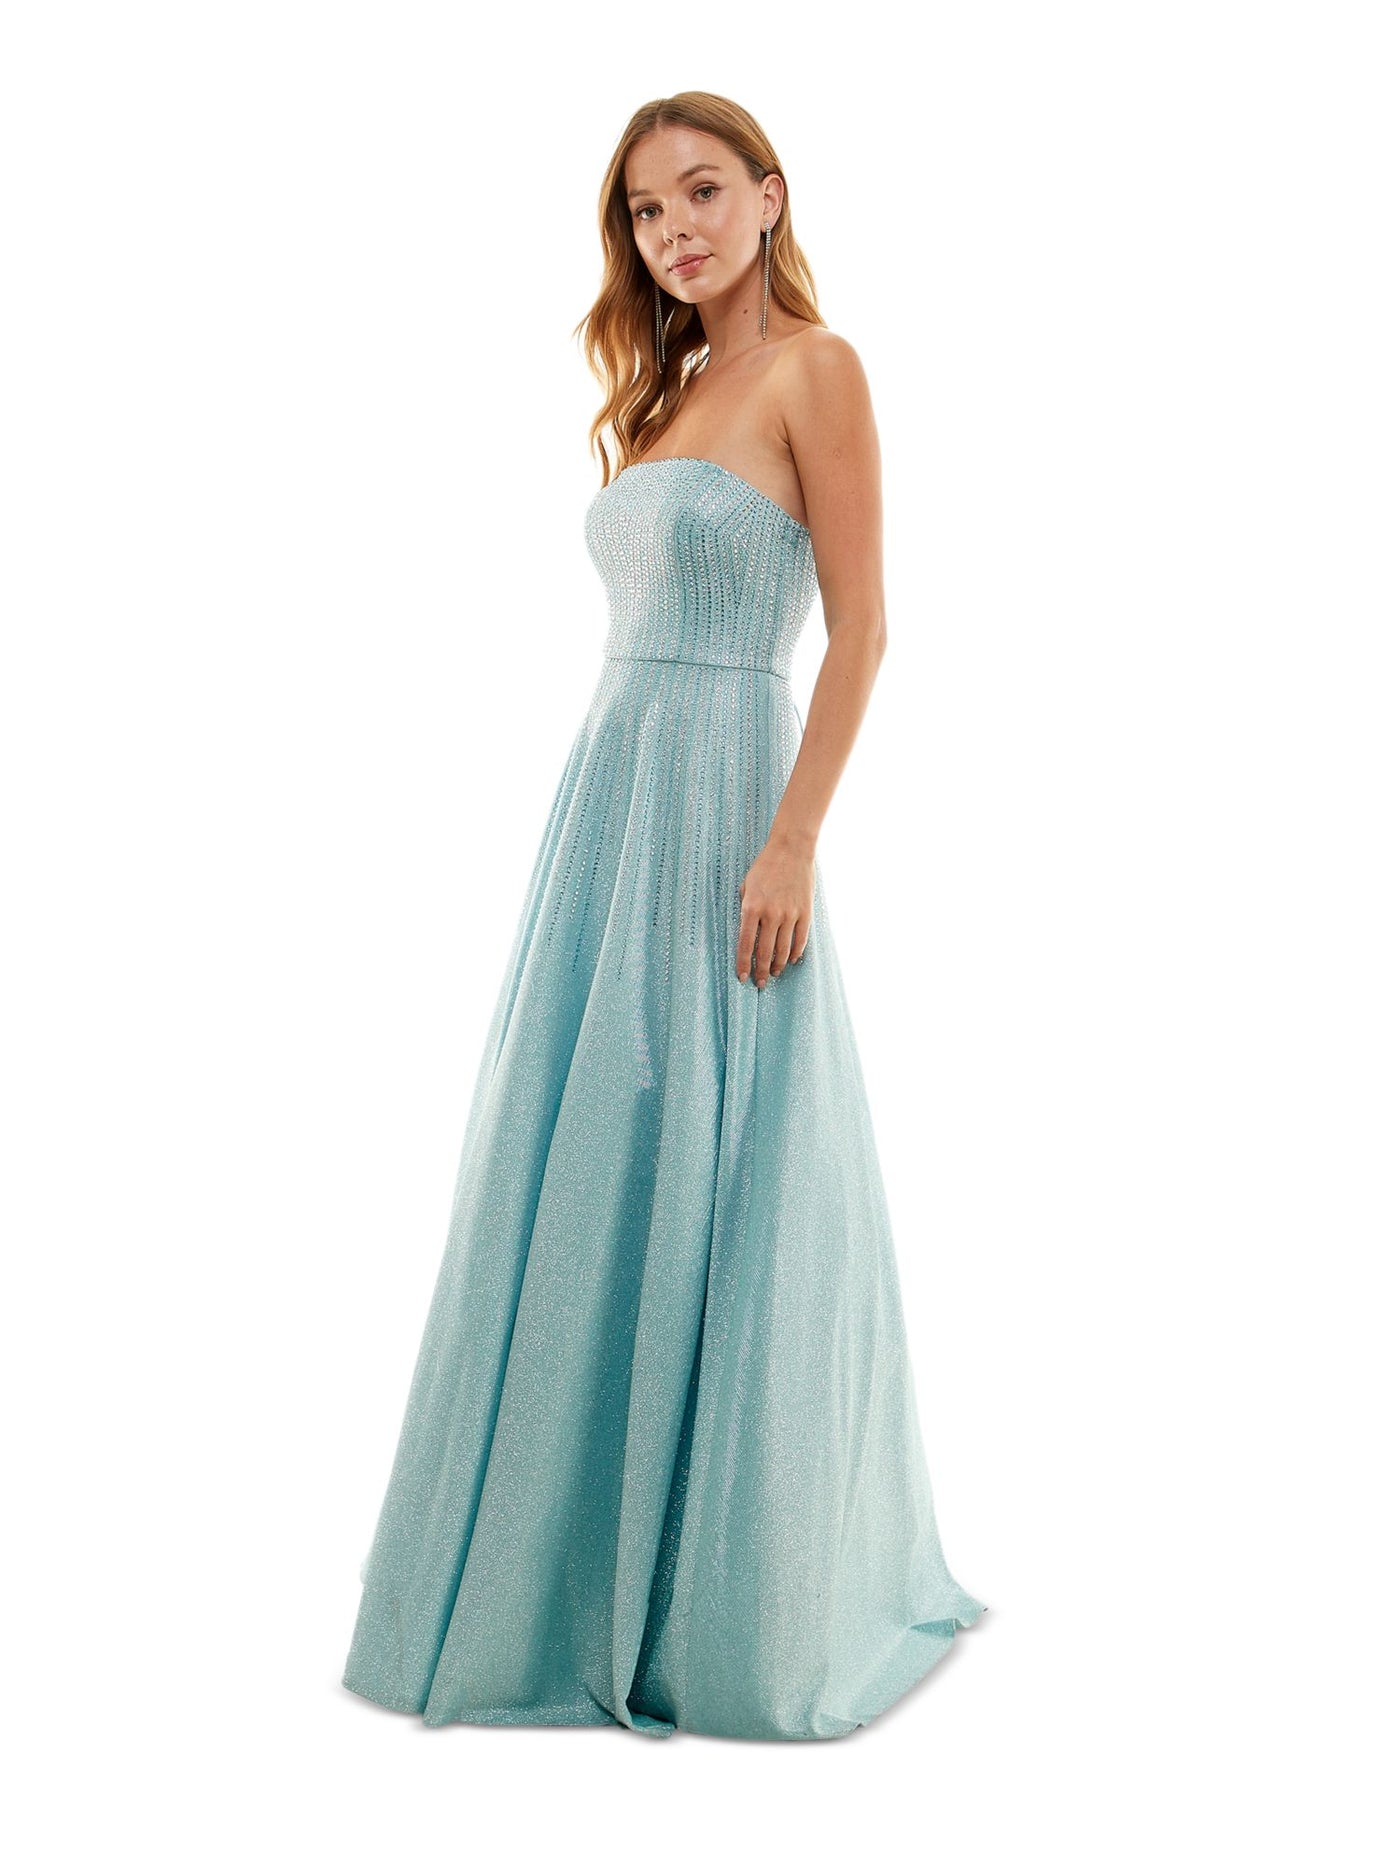 SAY YES TO THE PROM Womens Light Blue Embellished Zippered Padded Lined Tulle Lace Up Back Sleeveless Strapless Full-Length Formal Gown Dress Juniors 9